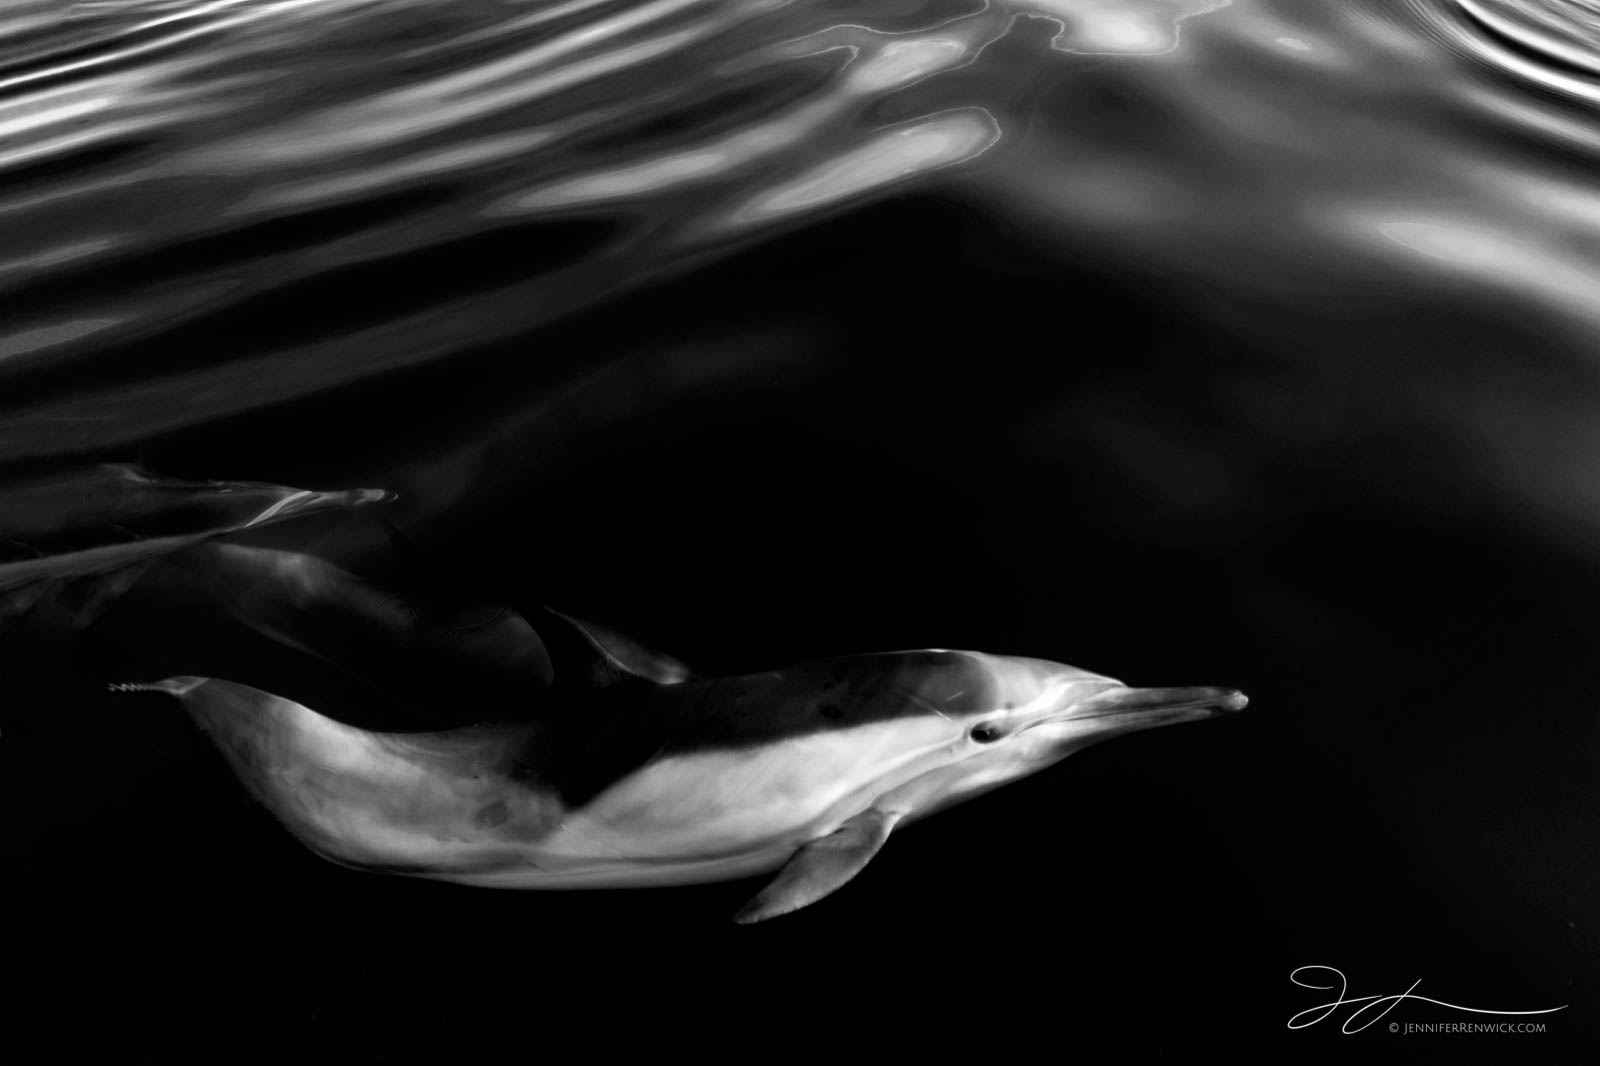 A common dolphin navigates the rippled surface of the ocean.